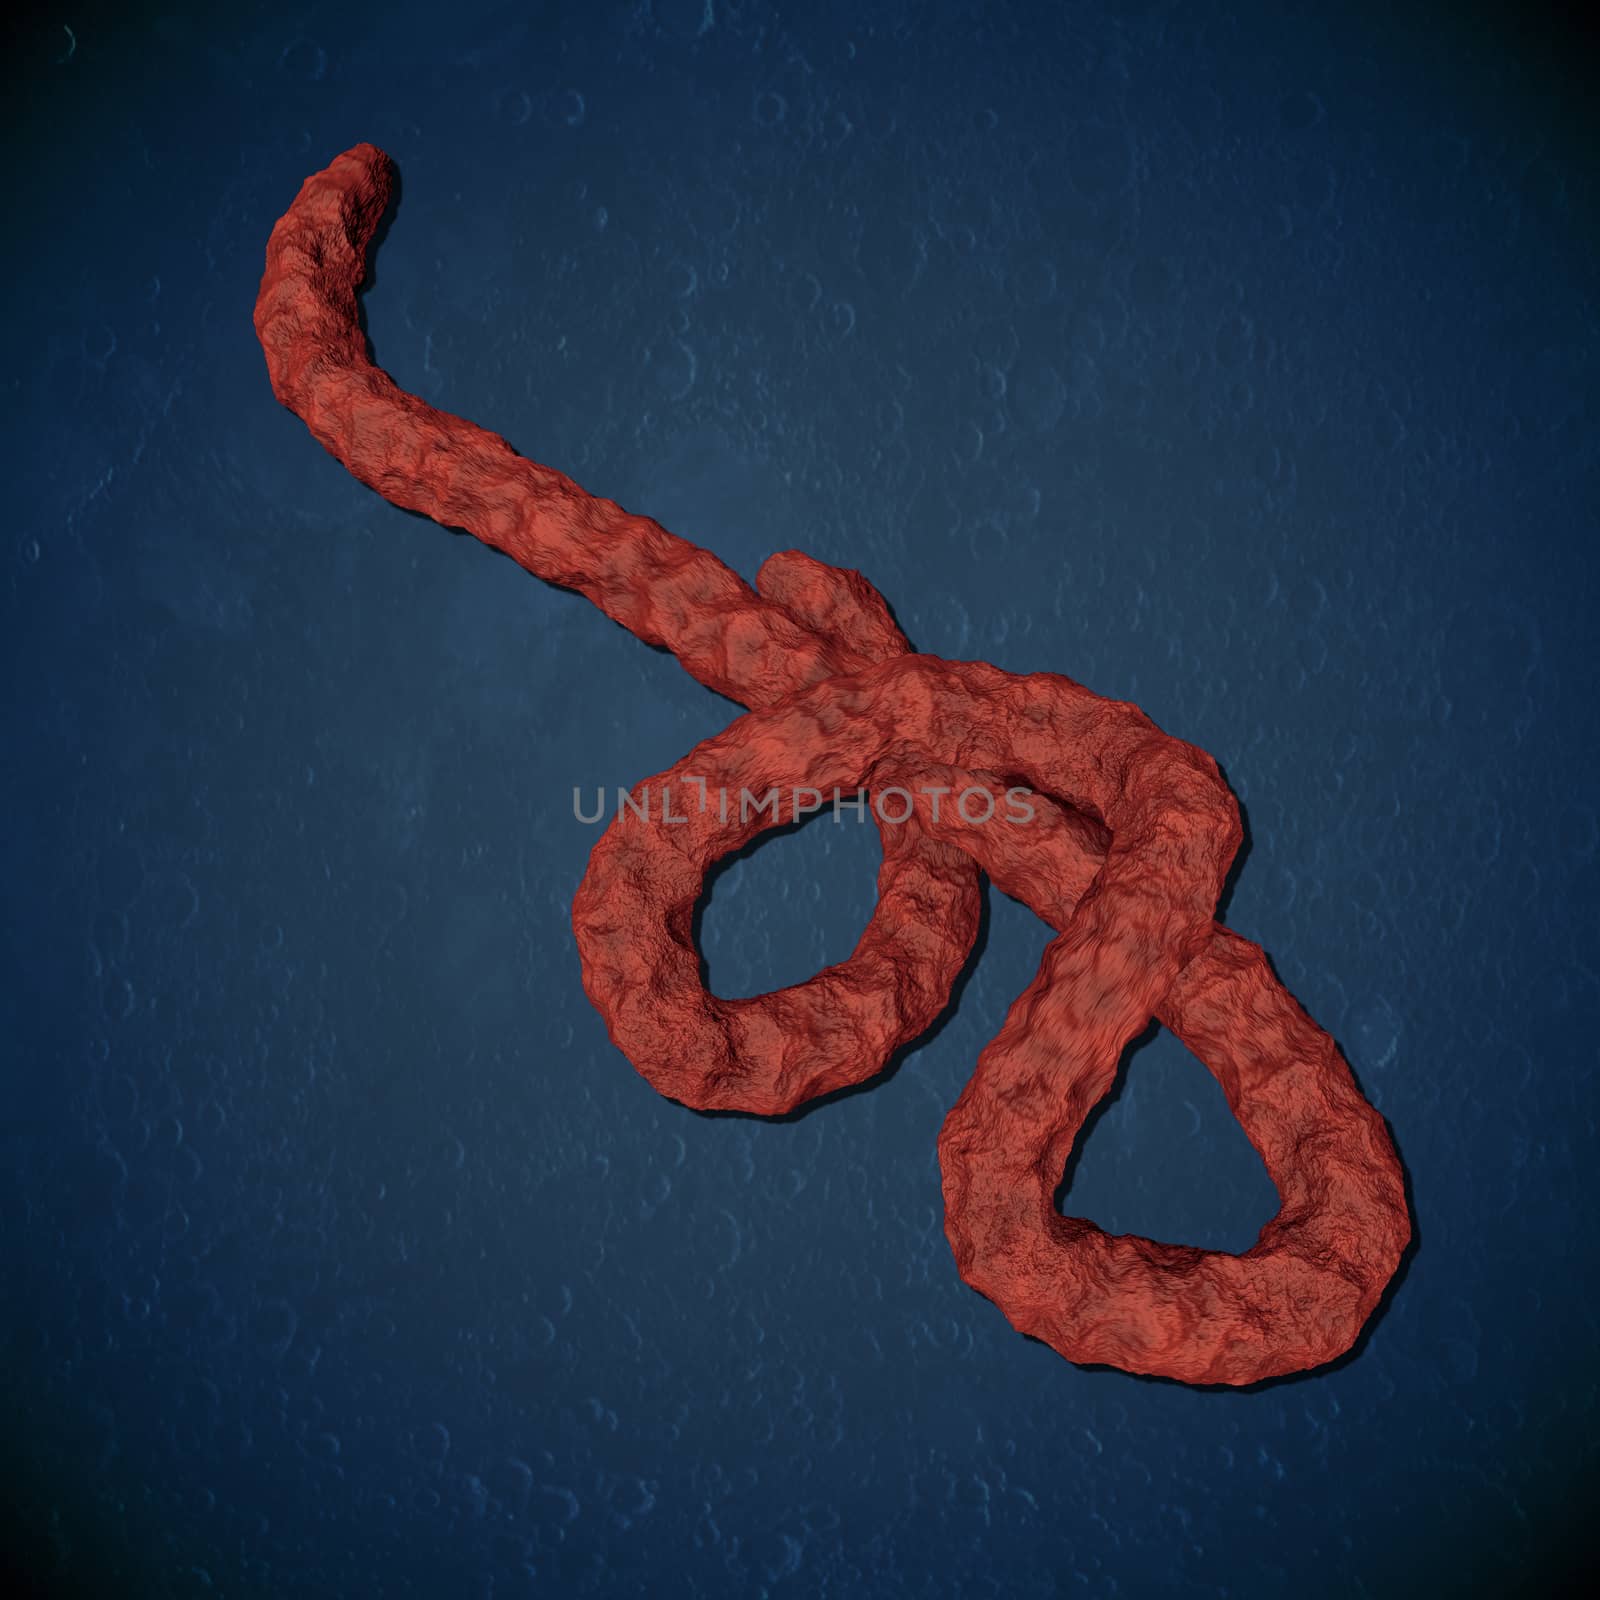 astract render of an ebola virus in human blood